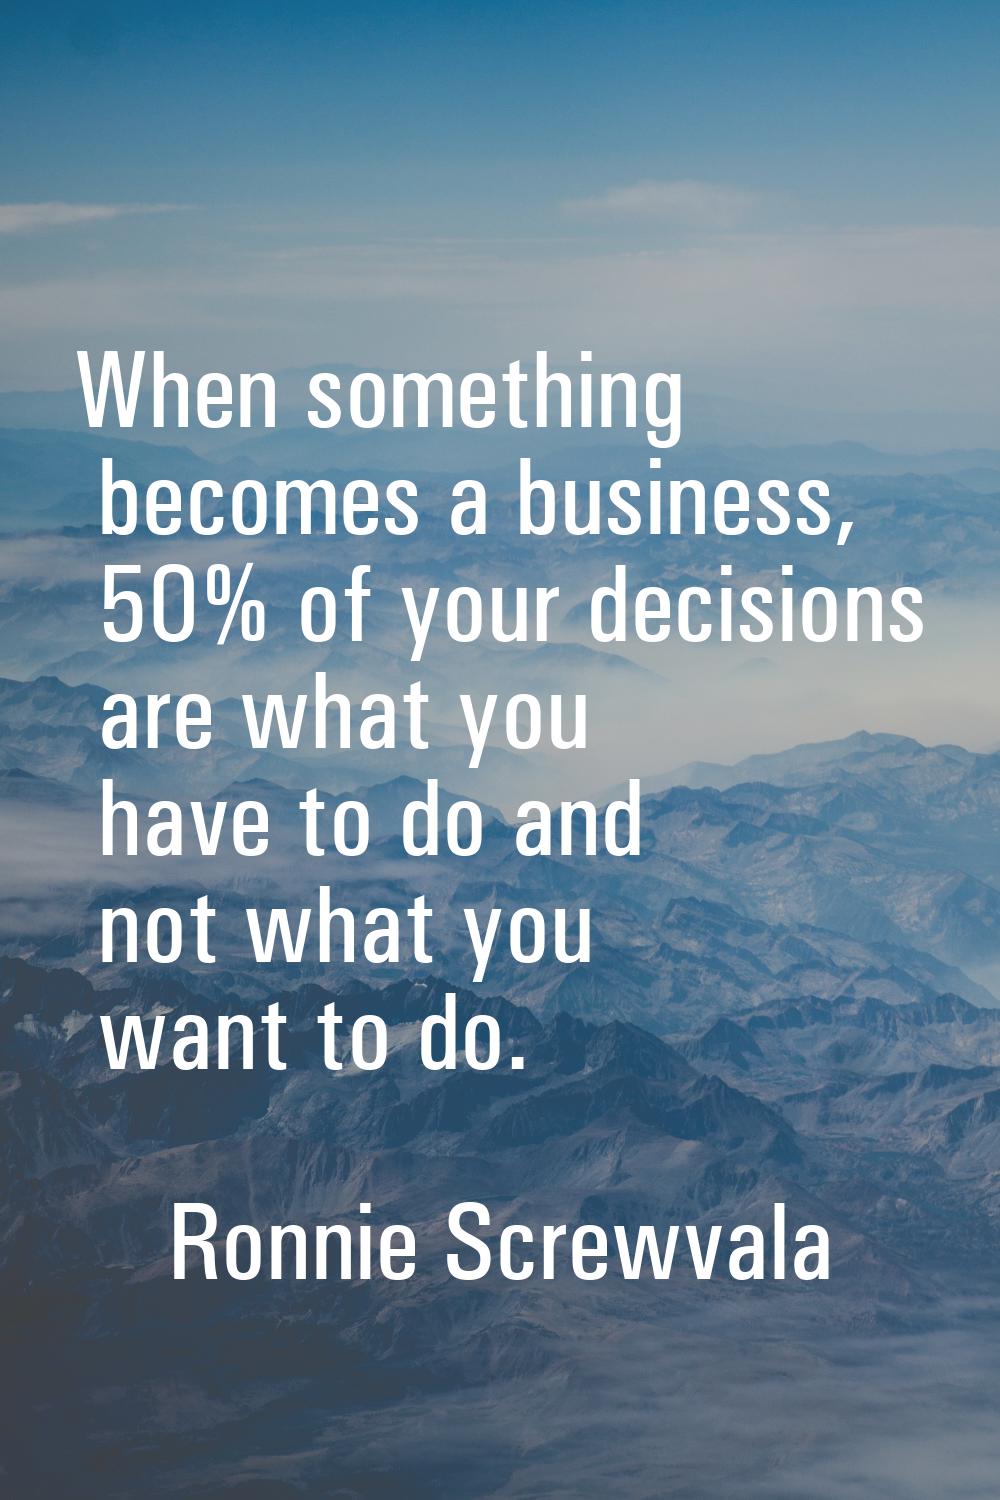 When something becomes a business, 50% of your decisions are what you have to do and not what you w